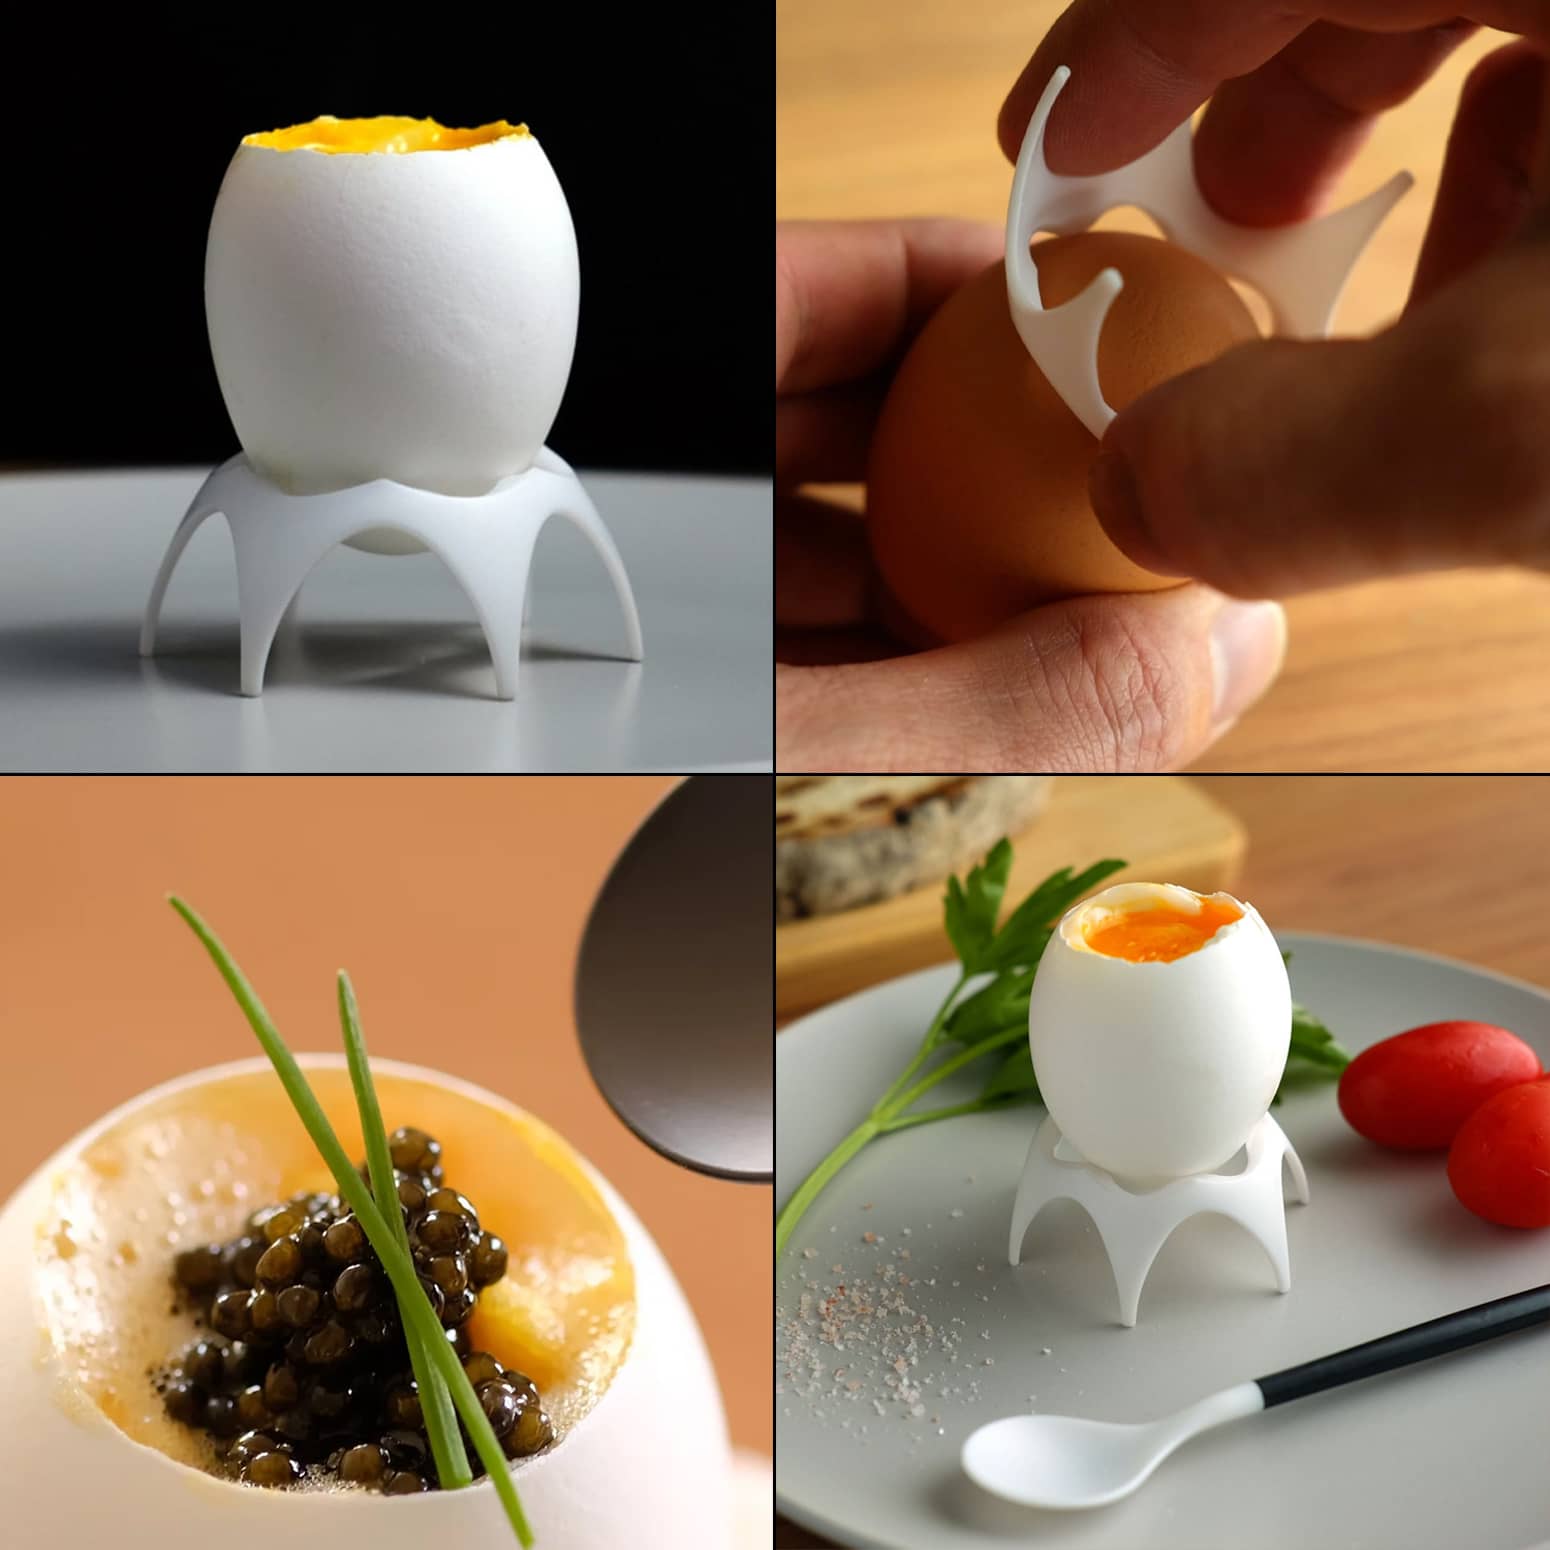 Zikico Temo - Zirconia Eggshell Cutter and Stand for Soft-Boiled Eggs